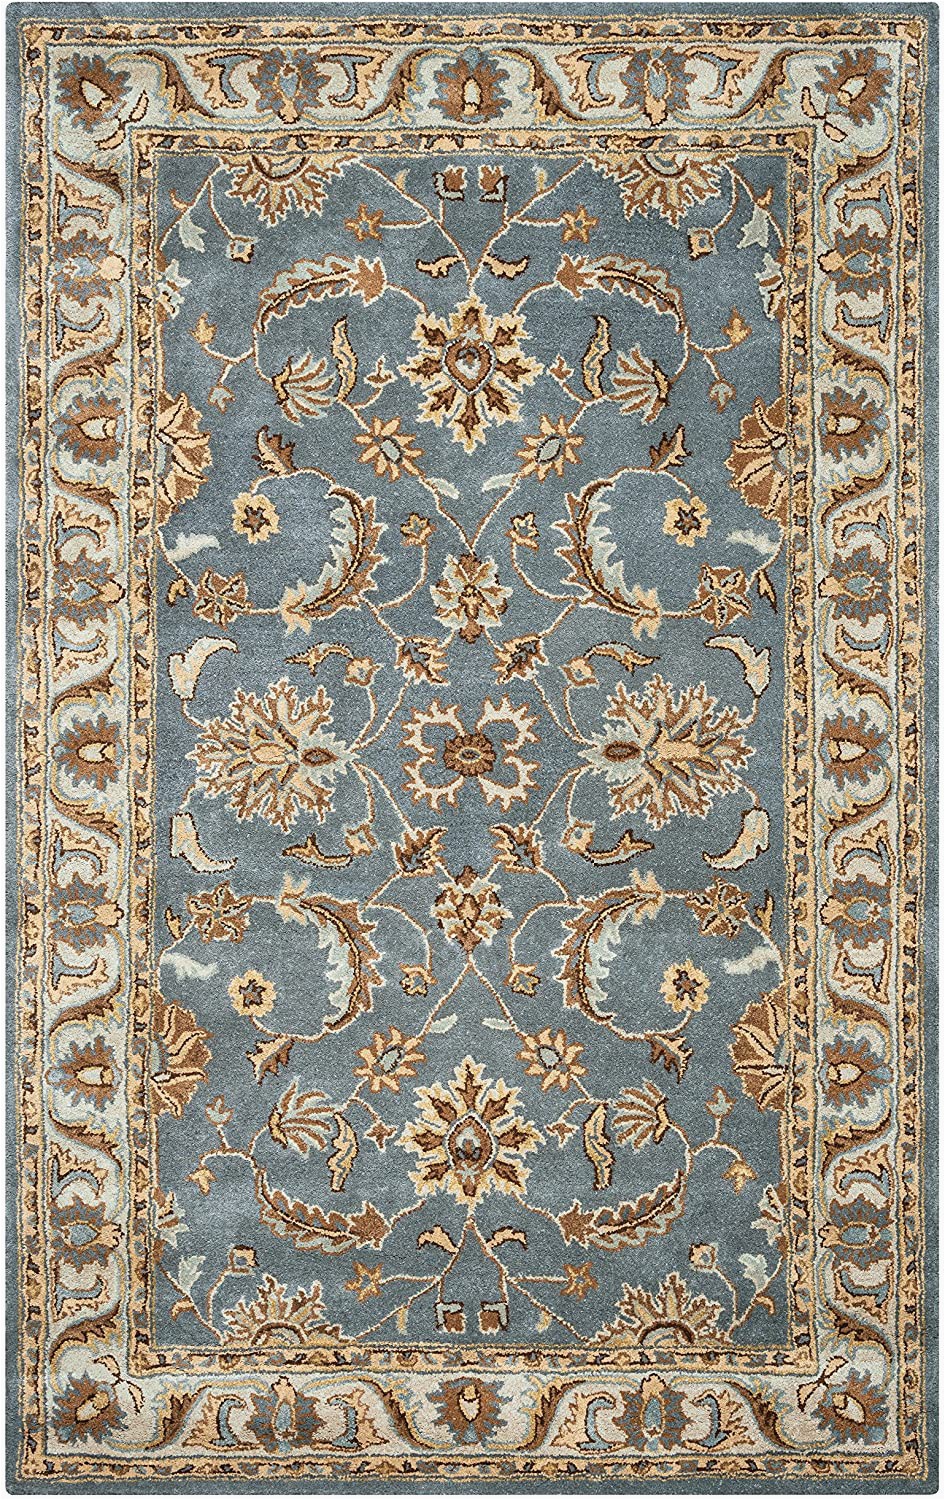 Brown Blue Tan area Rug Rizzy Home Volare Collection Wool area Rug 8 X 10 Blue Brown Tan Blue Lt Teal Lt Brown Border